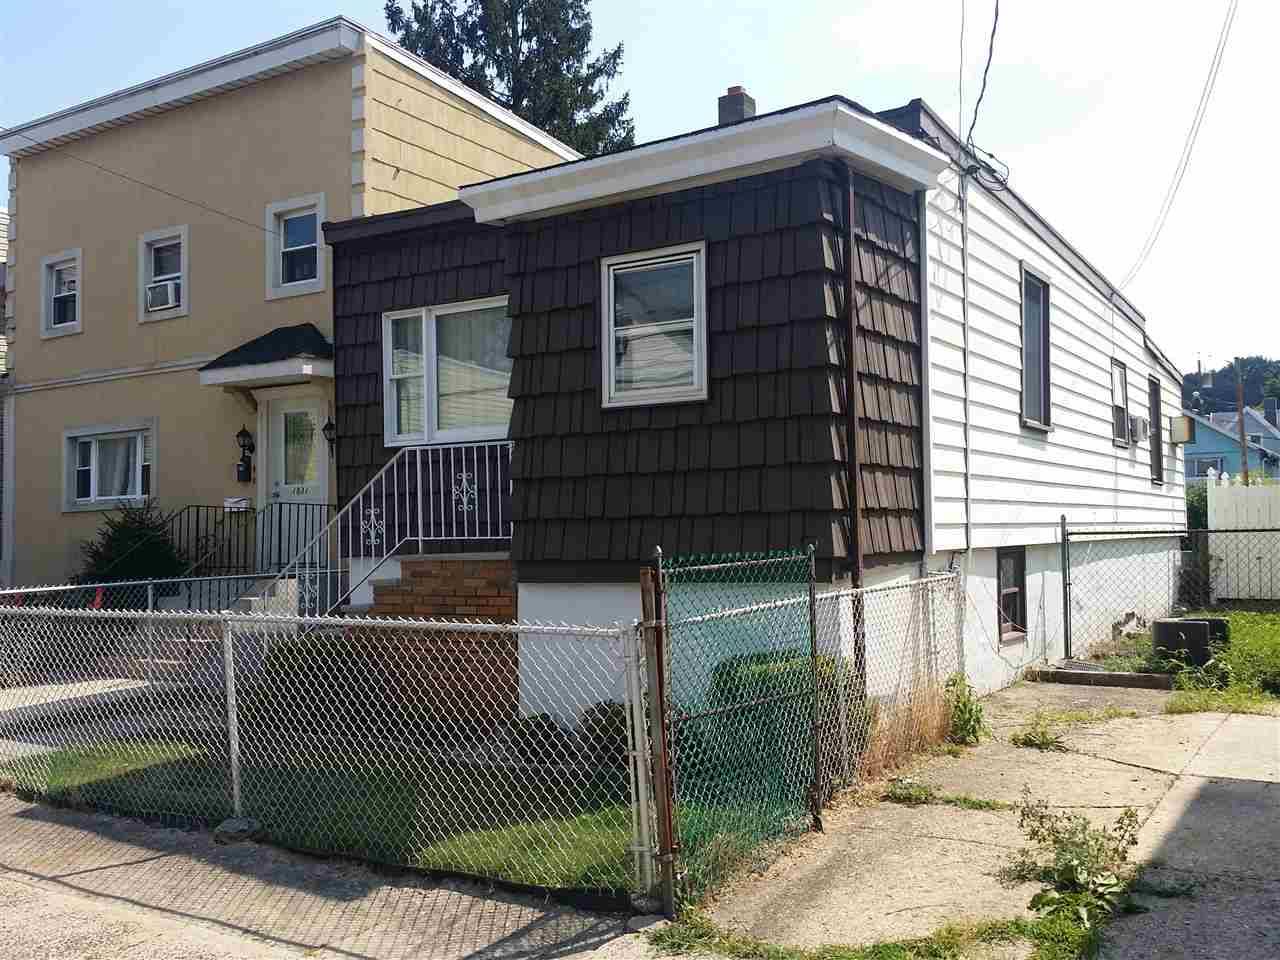 Great Starter Home or perfect for someone looking to downsize and a better alternative to a Condo